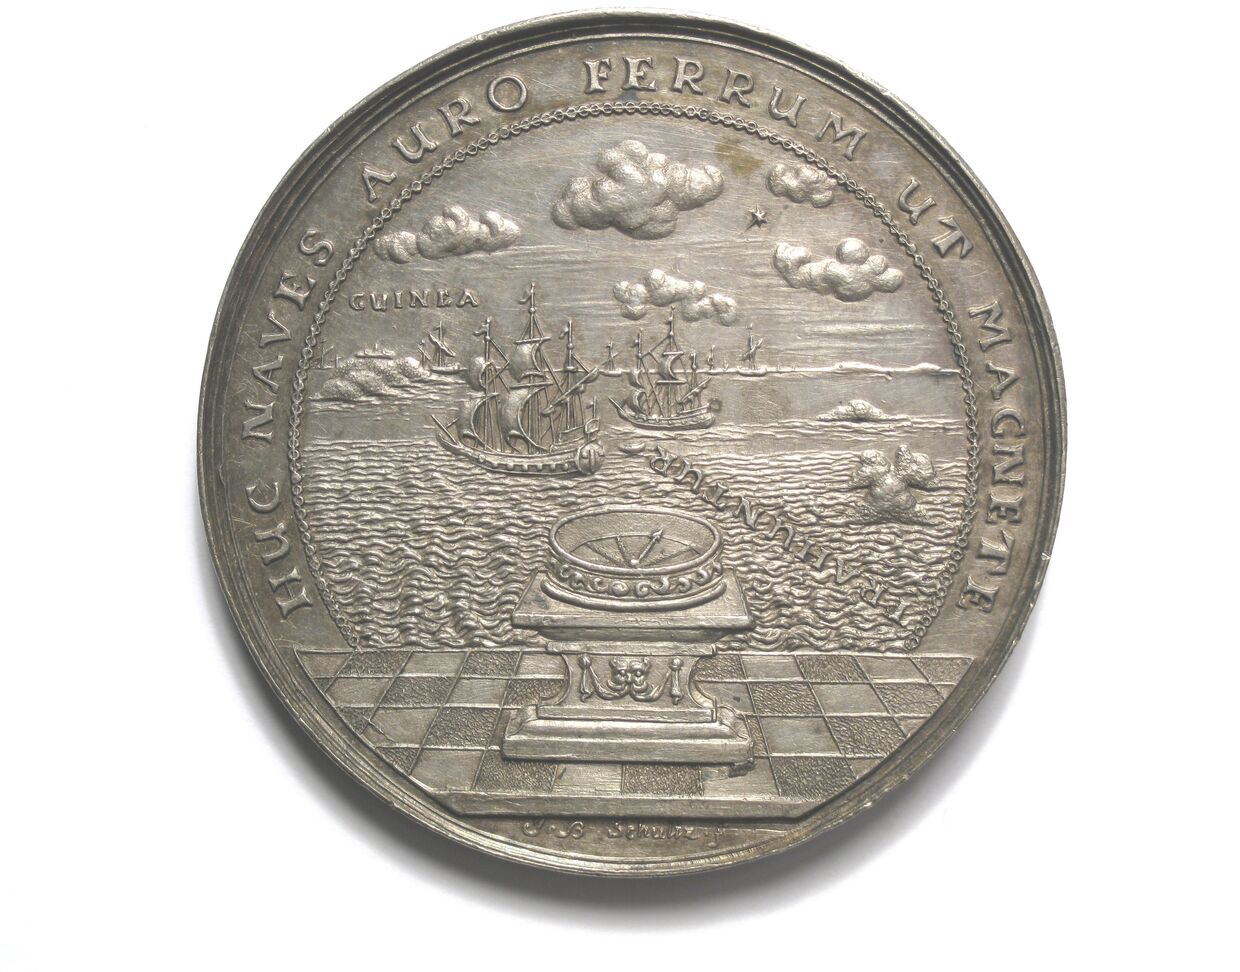 Medallion for the start of Brandenburg’s seafaring venture to the coast of West Africa in 1681